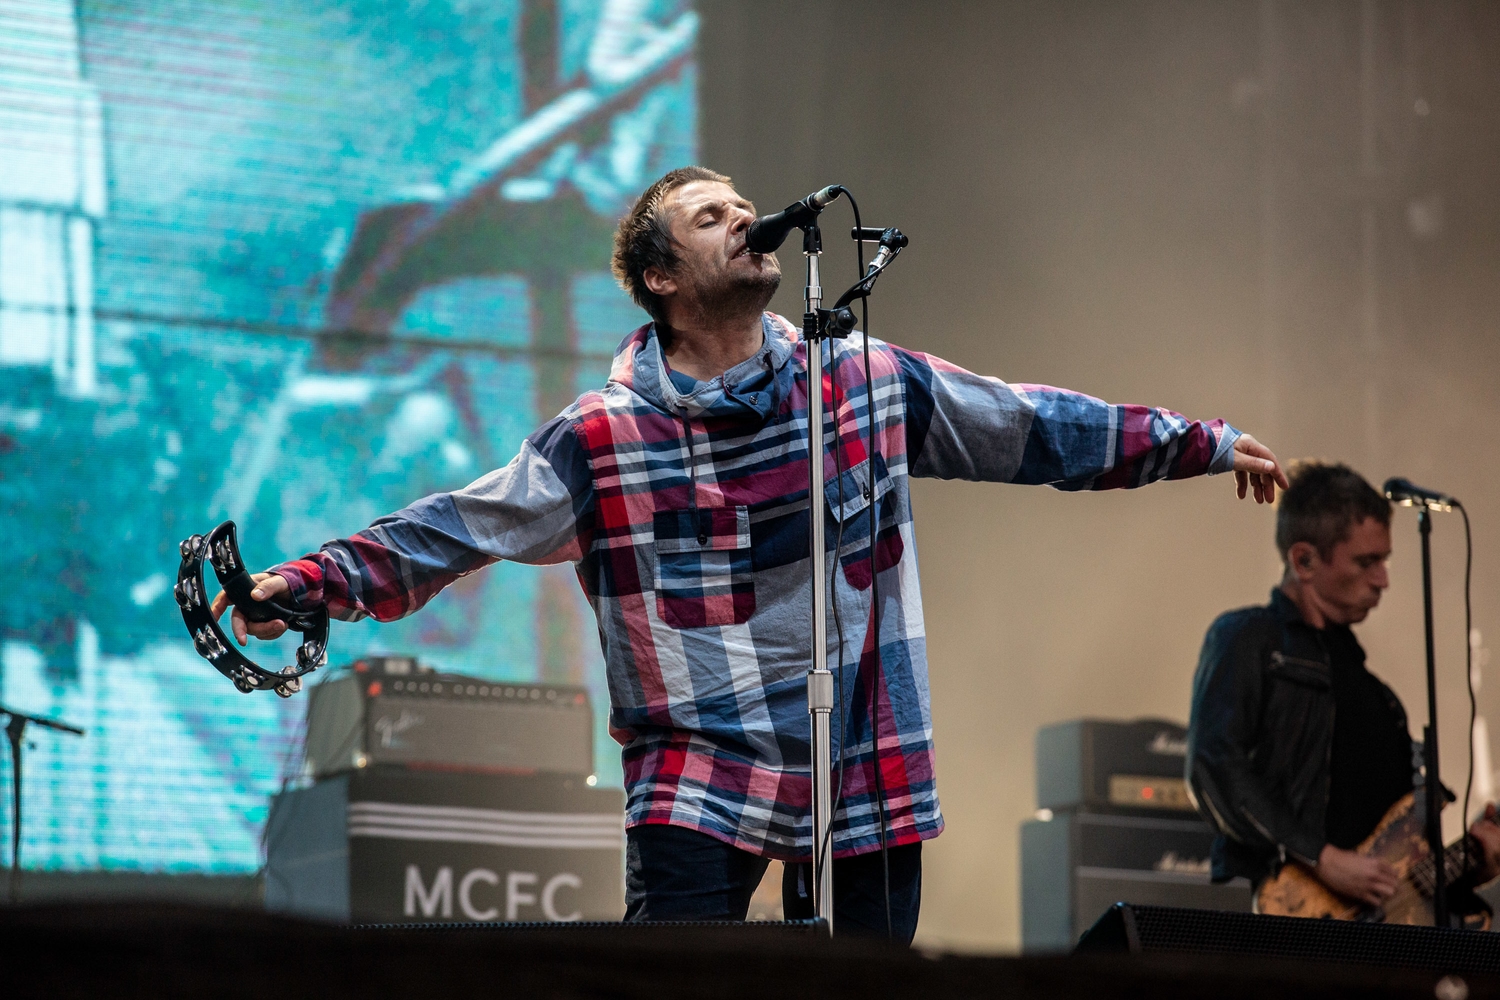 Liam Gallagher reveals new song ‘All You’re Dreaming Of’